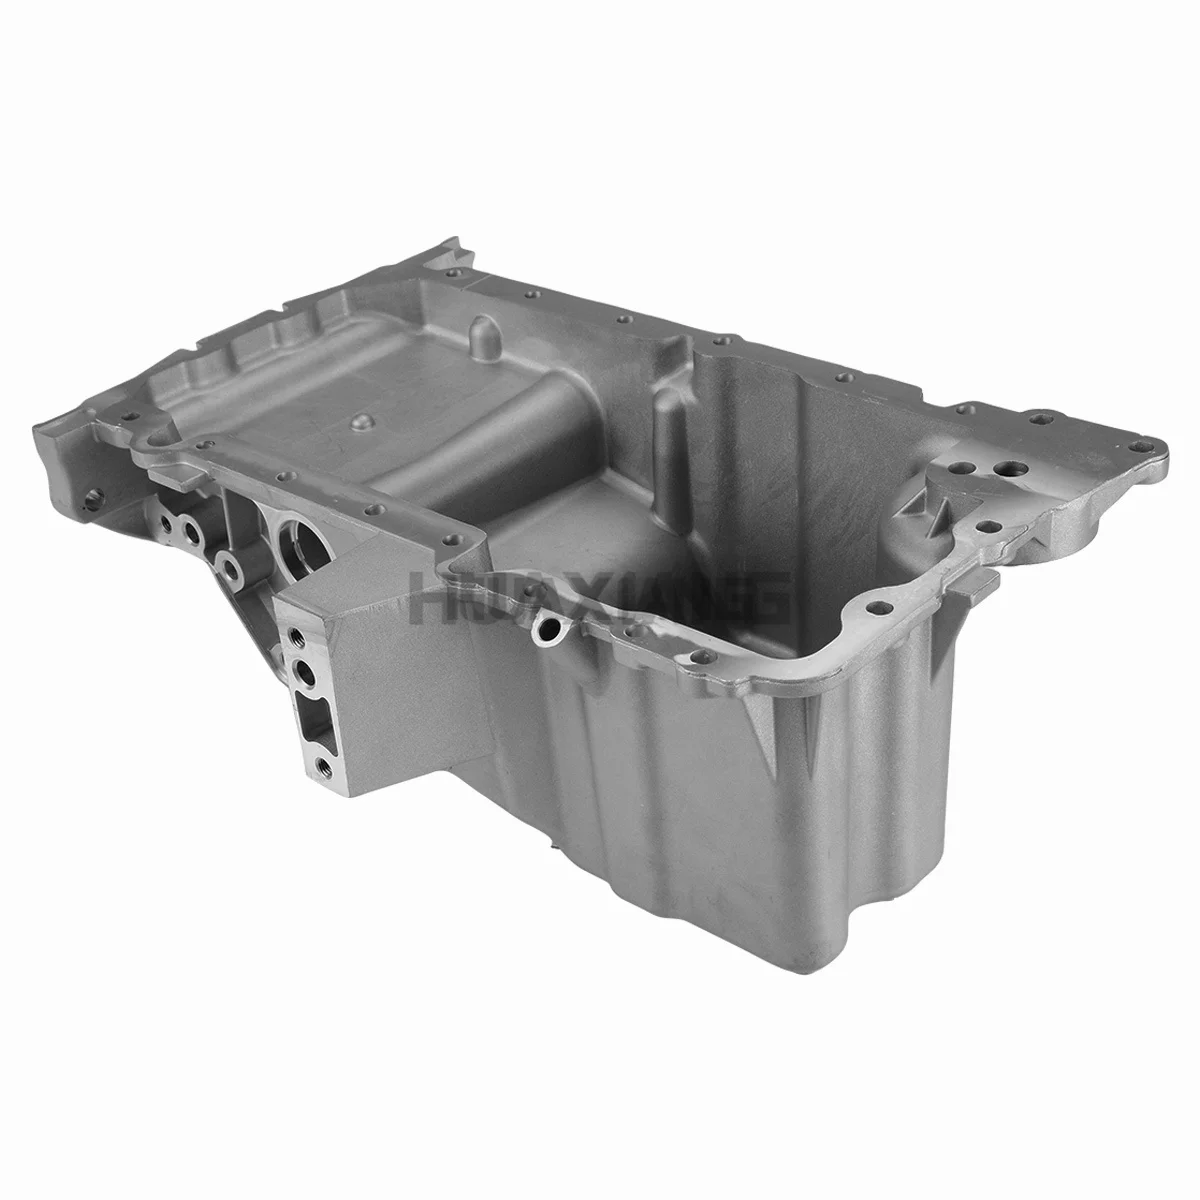 

A3 Wholesales RTS Engine Oil Pan for Chrysler 300 Dodge Charger Magnum V6 3.5L 2008 2009 2010 AWD 4792963AE